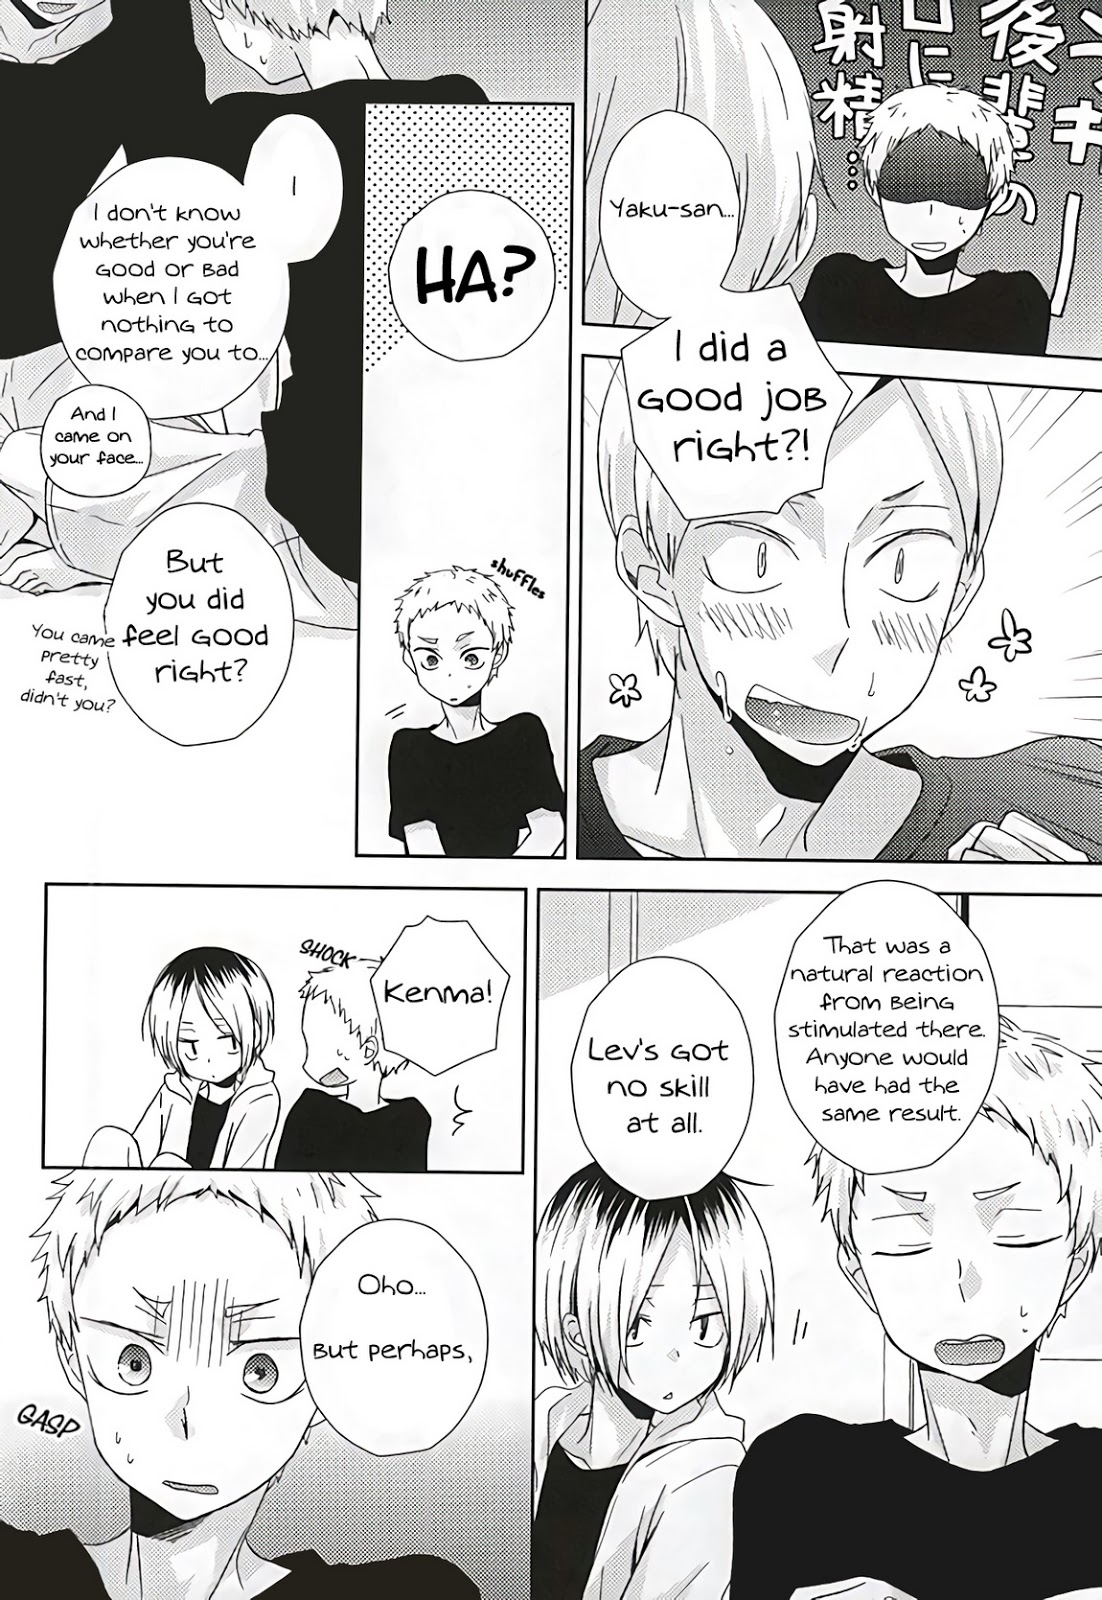 (SPARK10) [MOBRIS (Tomoharu)] HOWtoPLAY tutrial (Haikyuu!!) [English] [Homies over Hoes] page 7 full